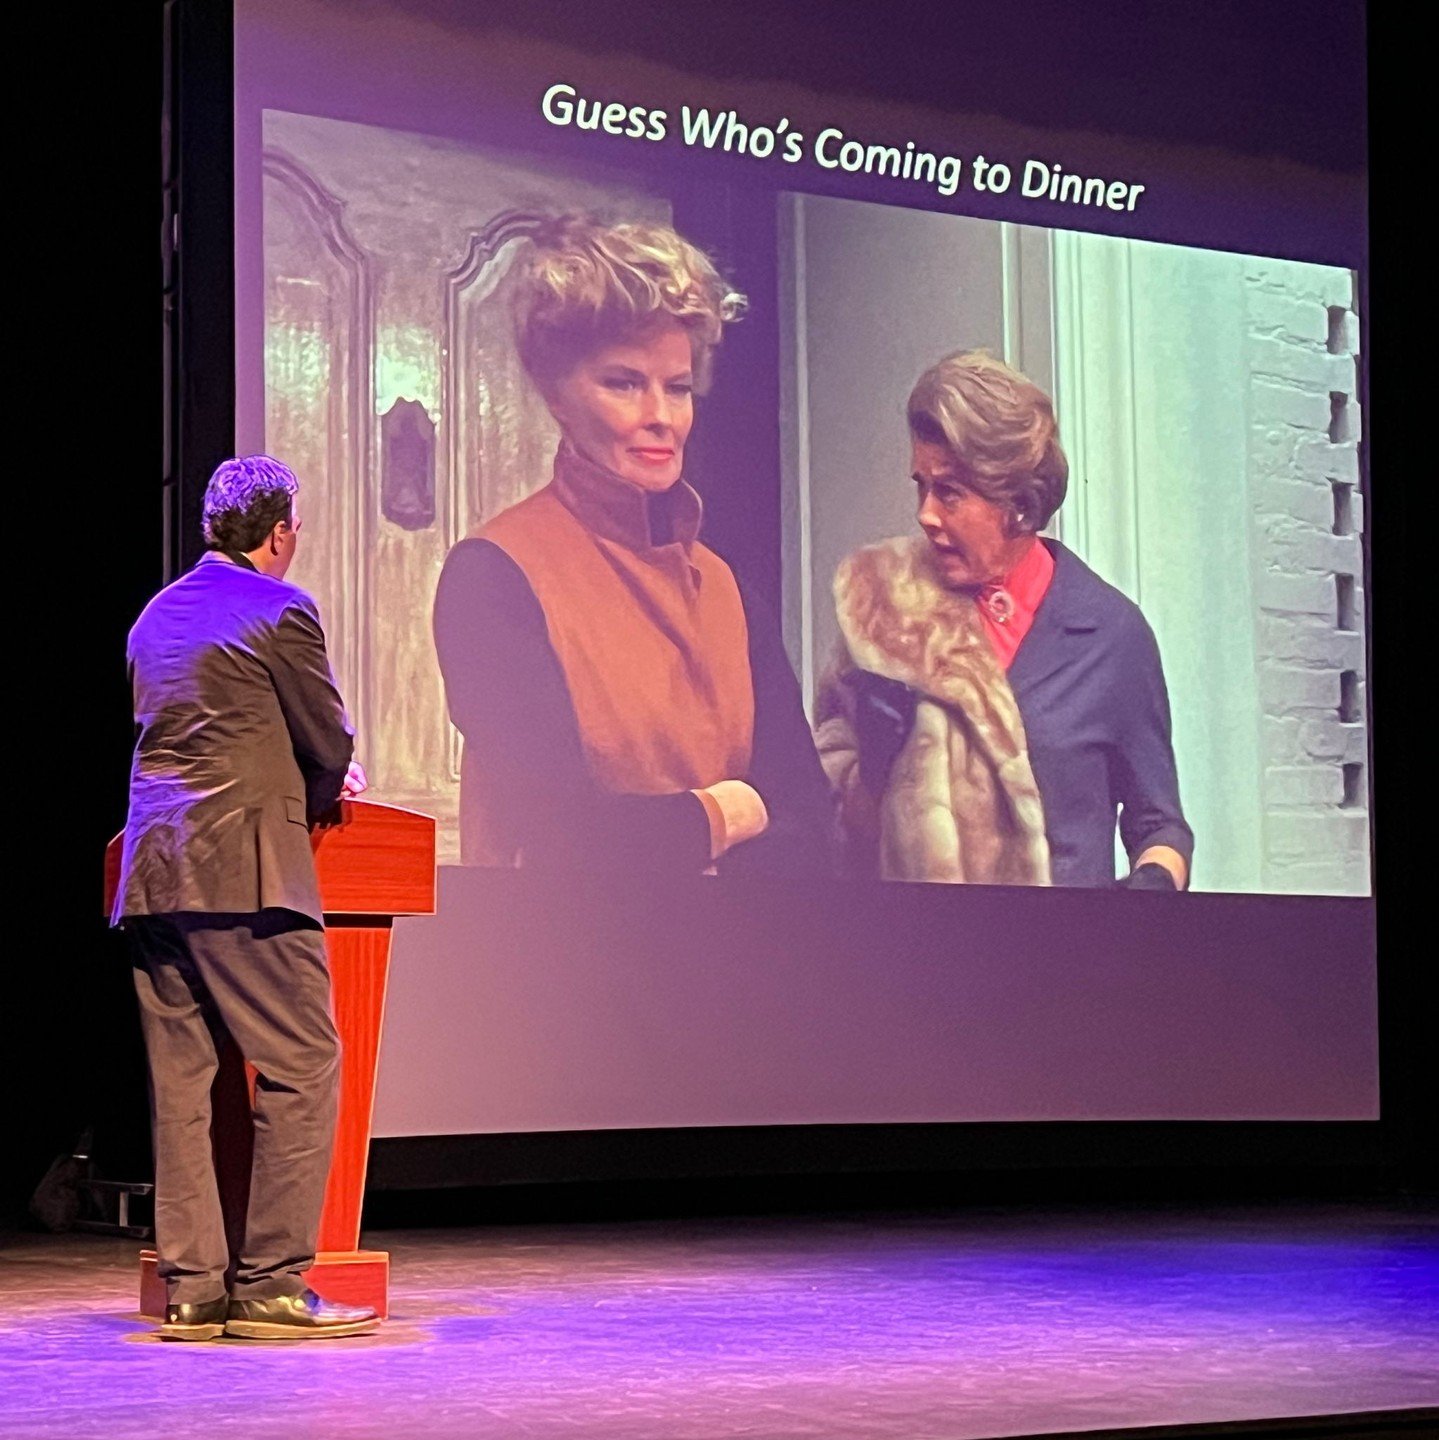 Special thanks to Thoughtful Productions and Bard Film Professor Joseph Luzzi for a fascinating event this past weekend at Woodstock Playhouse! Popular Bard College film professor Joseph Luzzi showed video clips from ten different movies, starting in